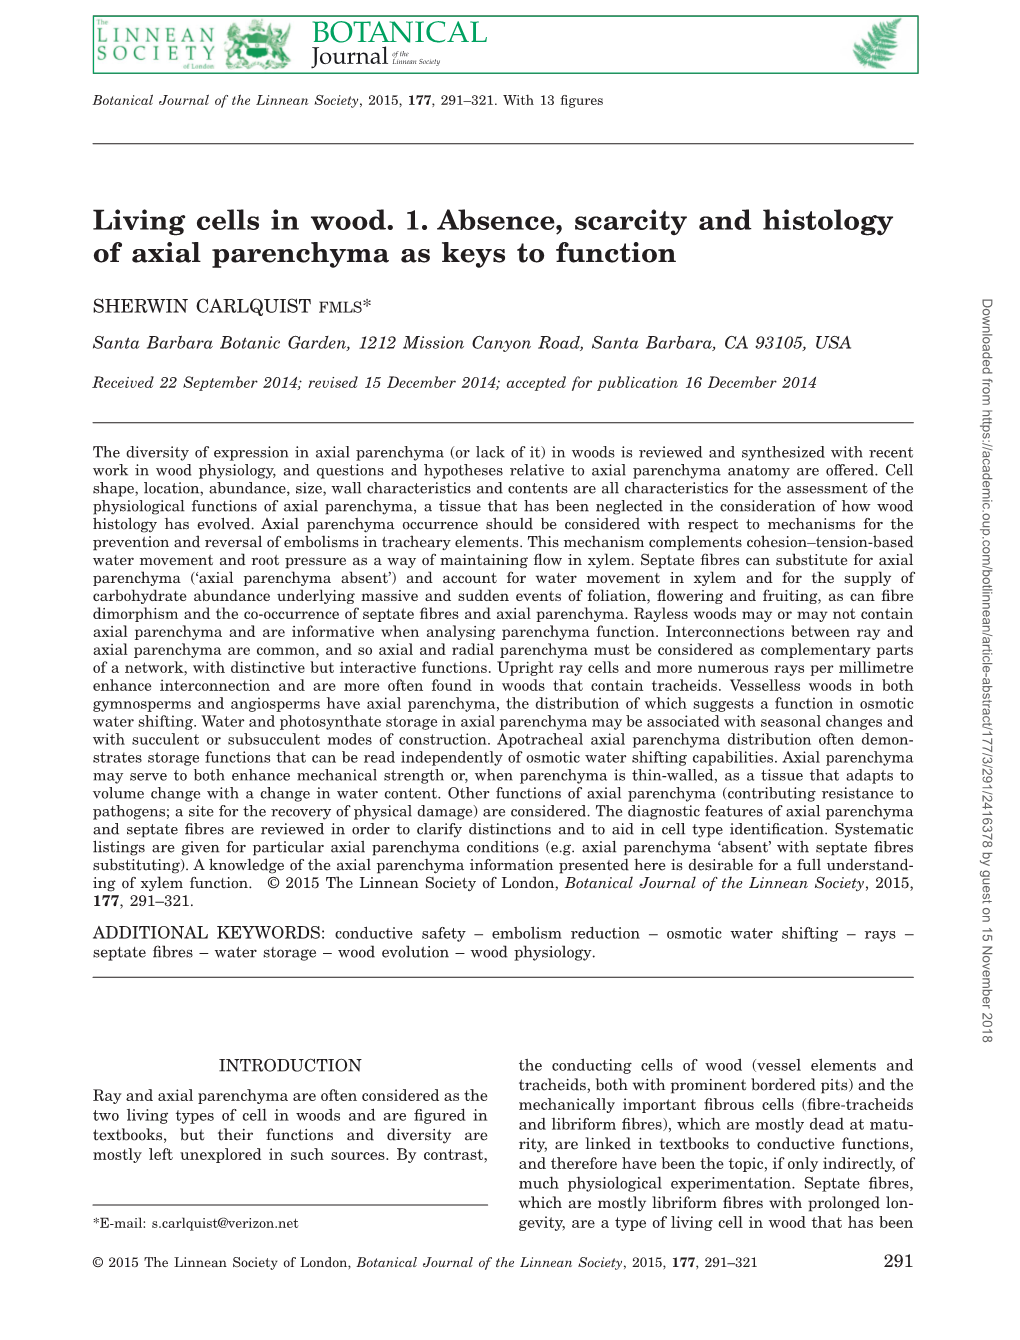 Living Cells in Wood. 1. Absence, Scarcity and Histology of Axial